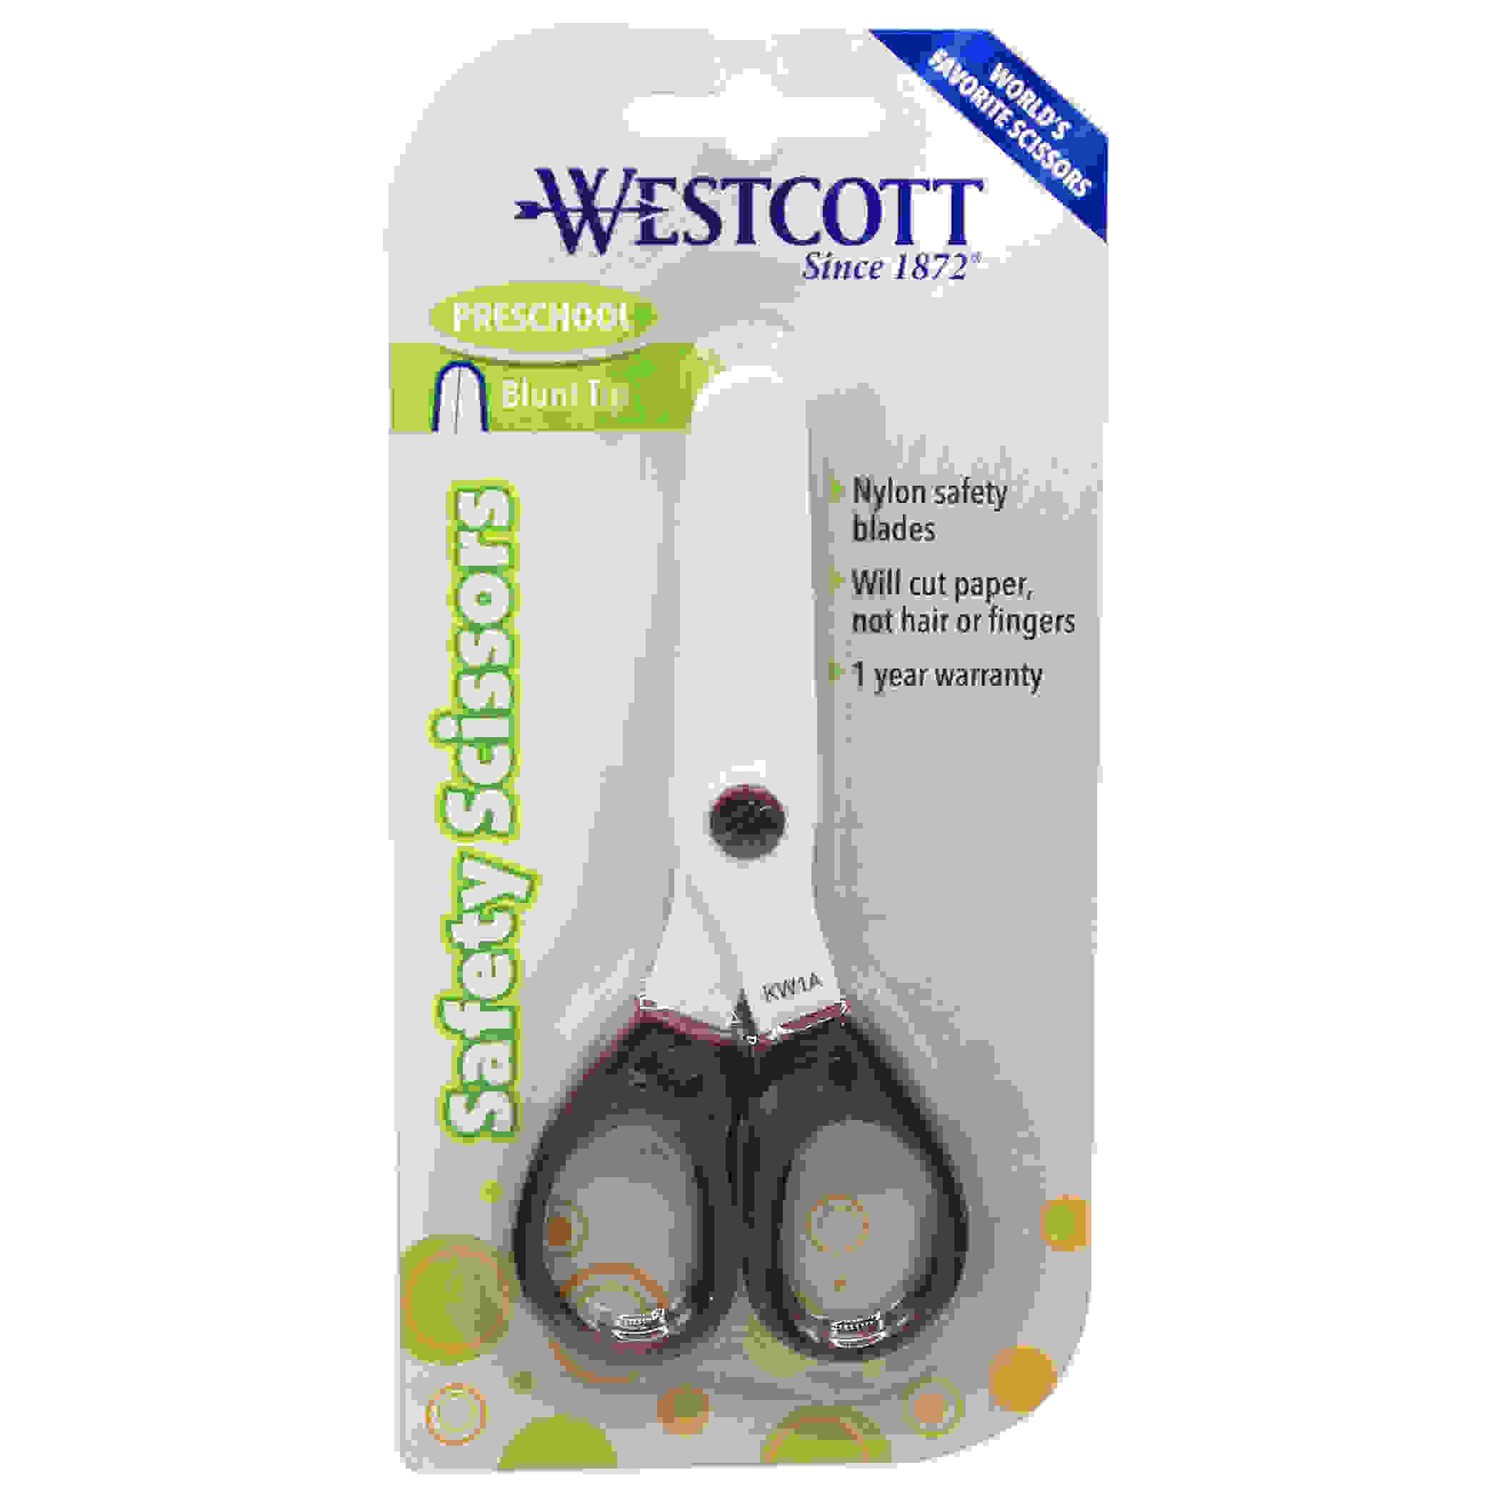 Westcott Super Safety Child Scissors - 5" Overall Length - Left/Right - Metal - Blunted Tip - Purple - 12 / Box